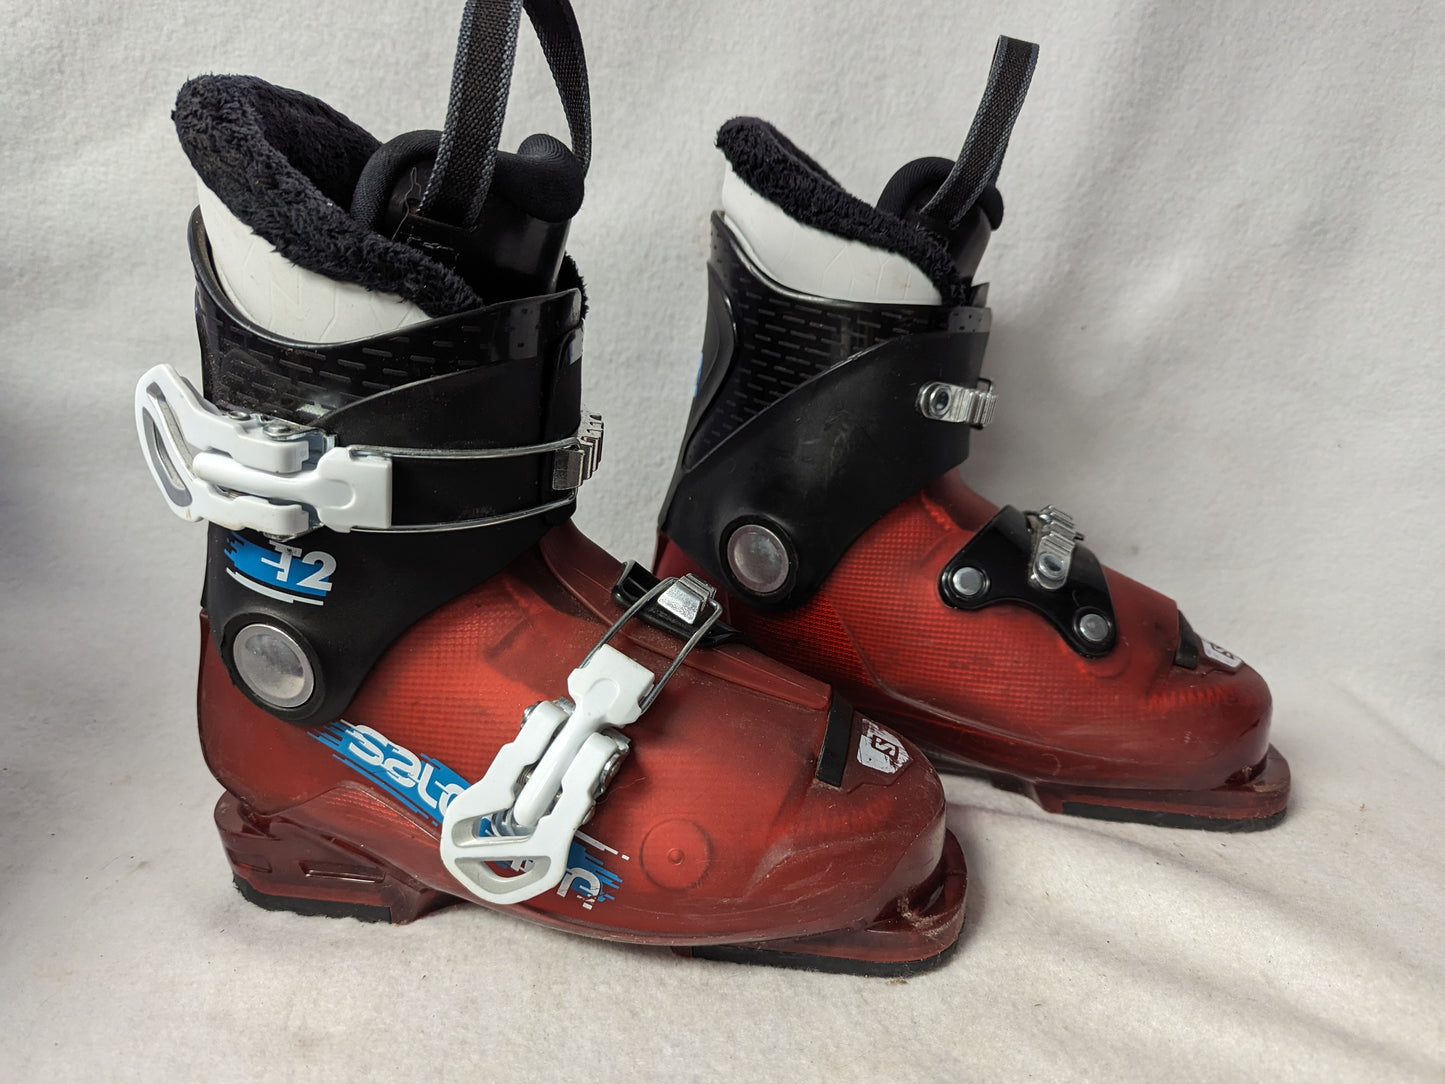 Salomon Performa T-2 Youth Ski Boots Size 20 Color Red Condition Used